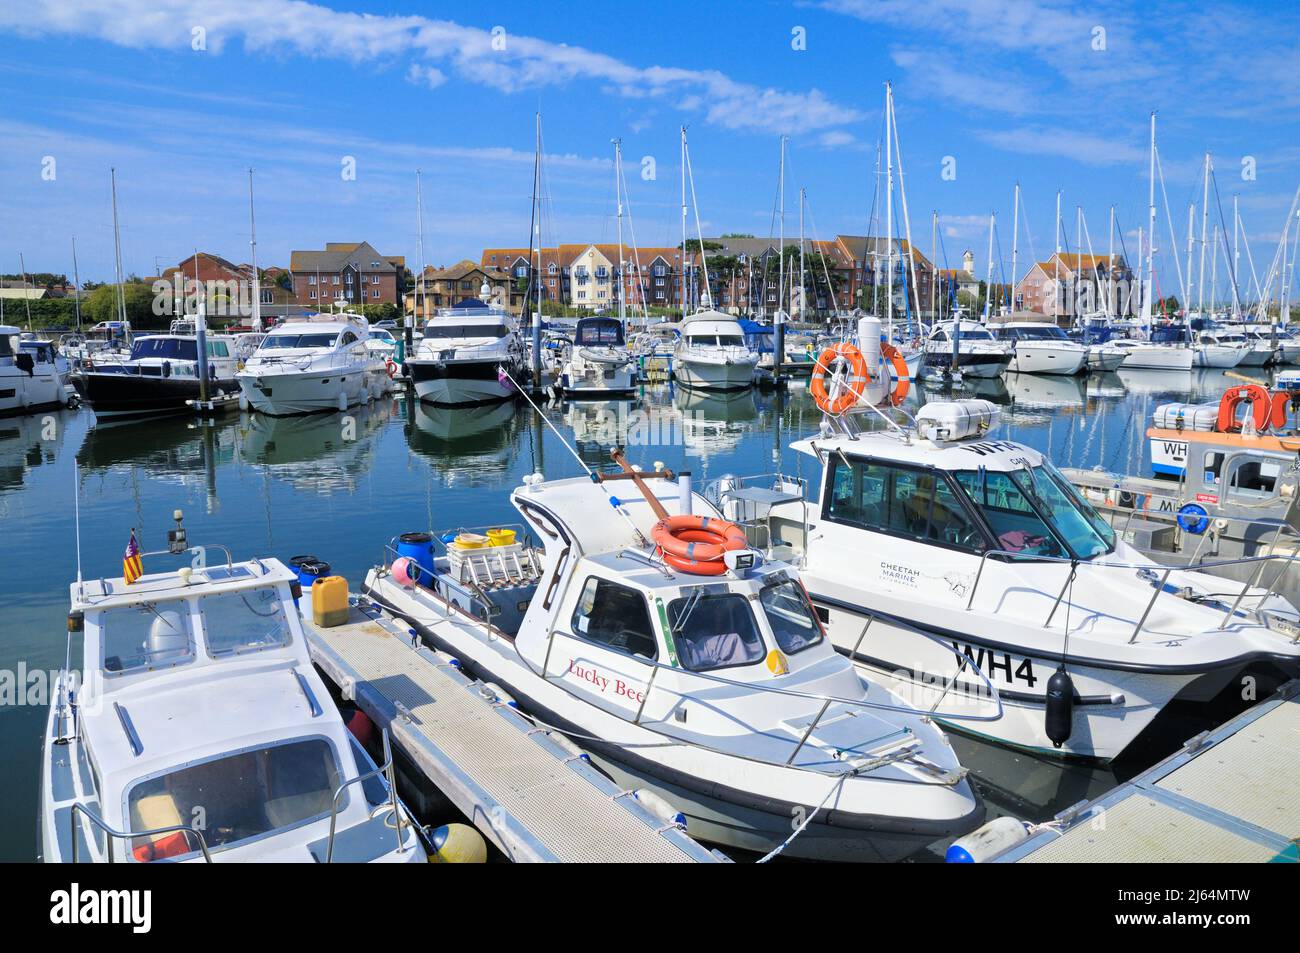 Boats in Weymouth Marina, a modern purpose-built marina with over 280 permanent and visiting berths in Weymouth's inner harbour, Dorset, England, UK Stock Photo